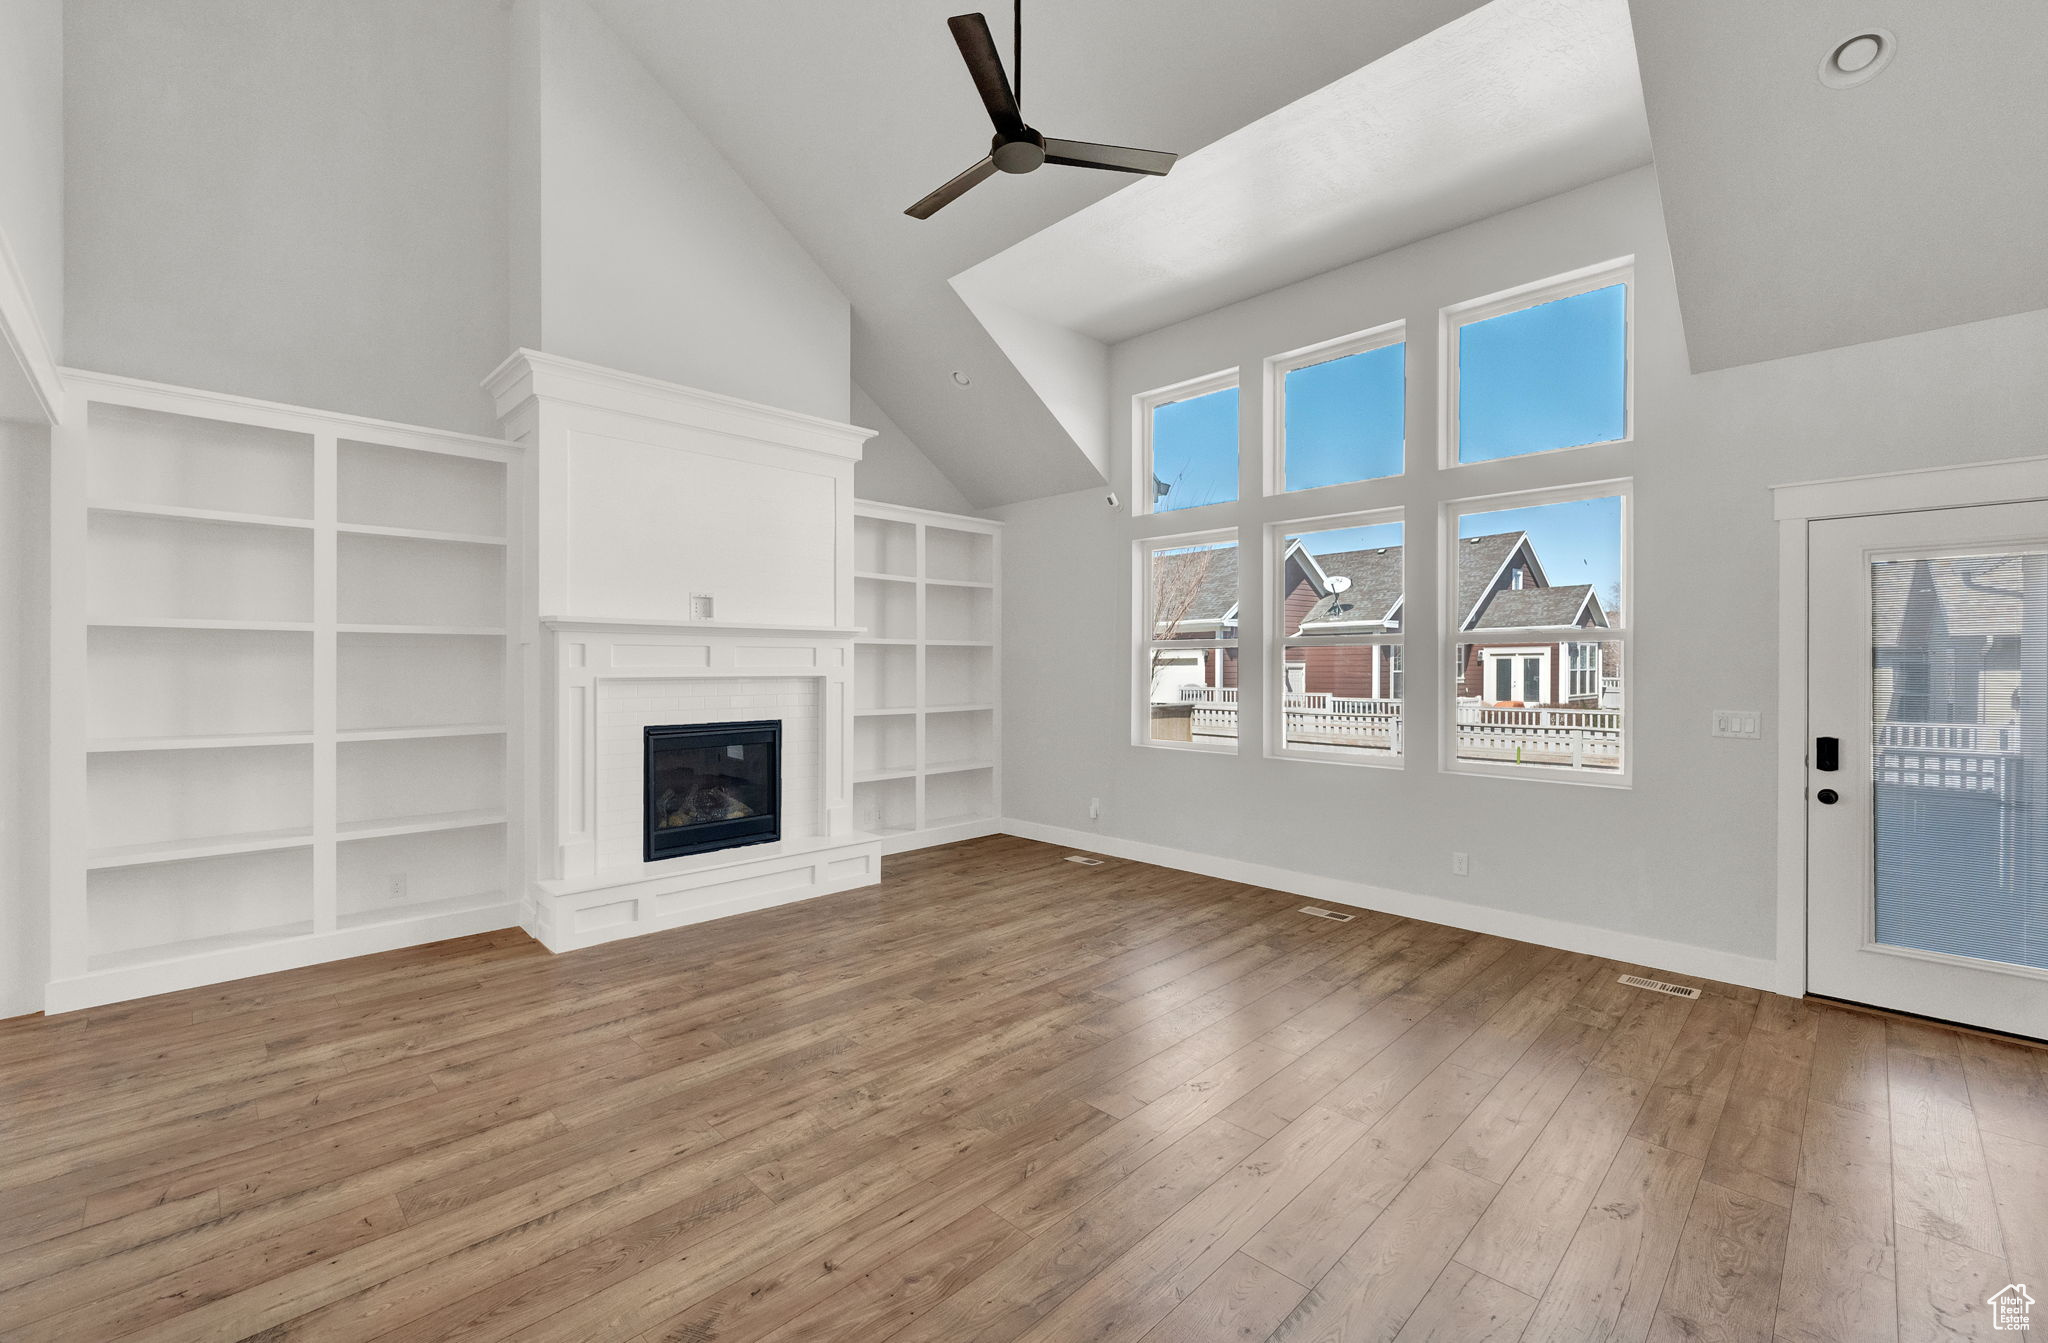 Living room with built in features, high vaulted ceiling, dark hardwood / wood-style floors, and ceiling fan